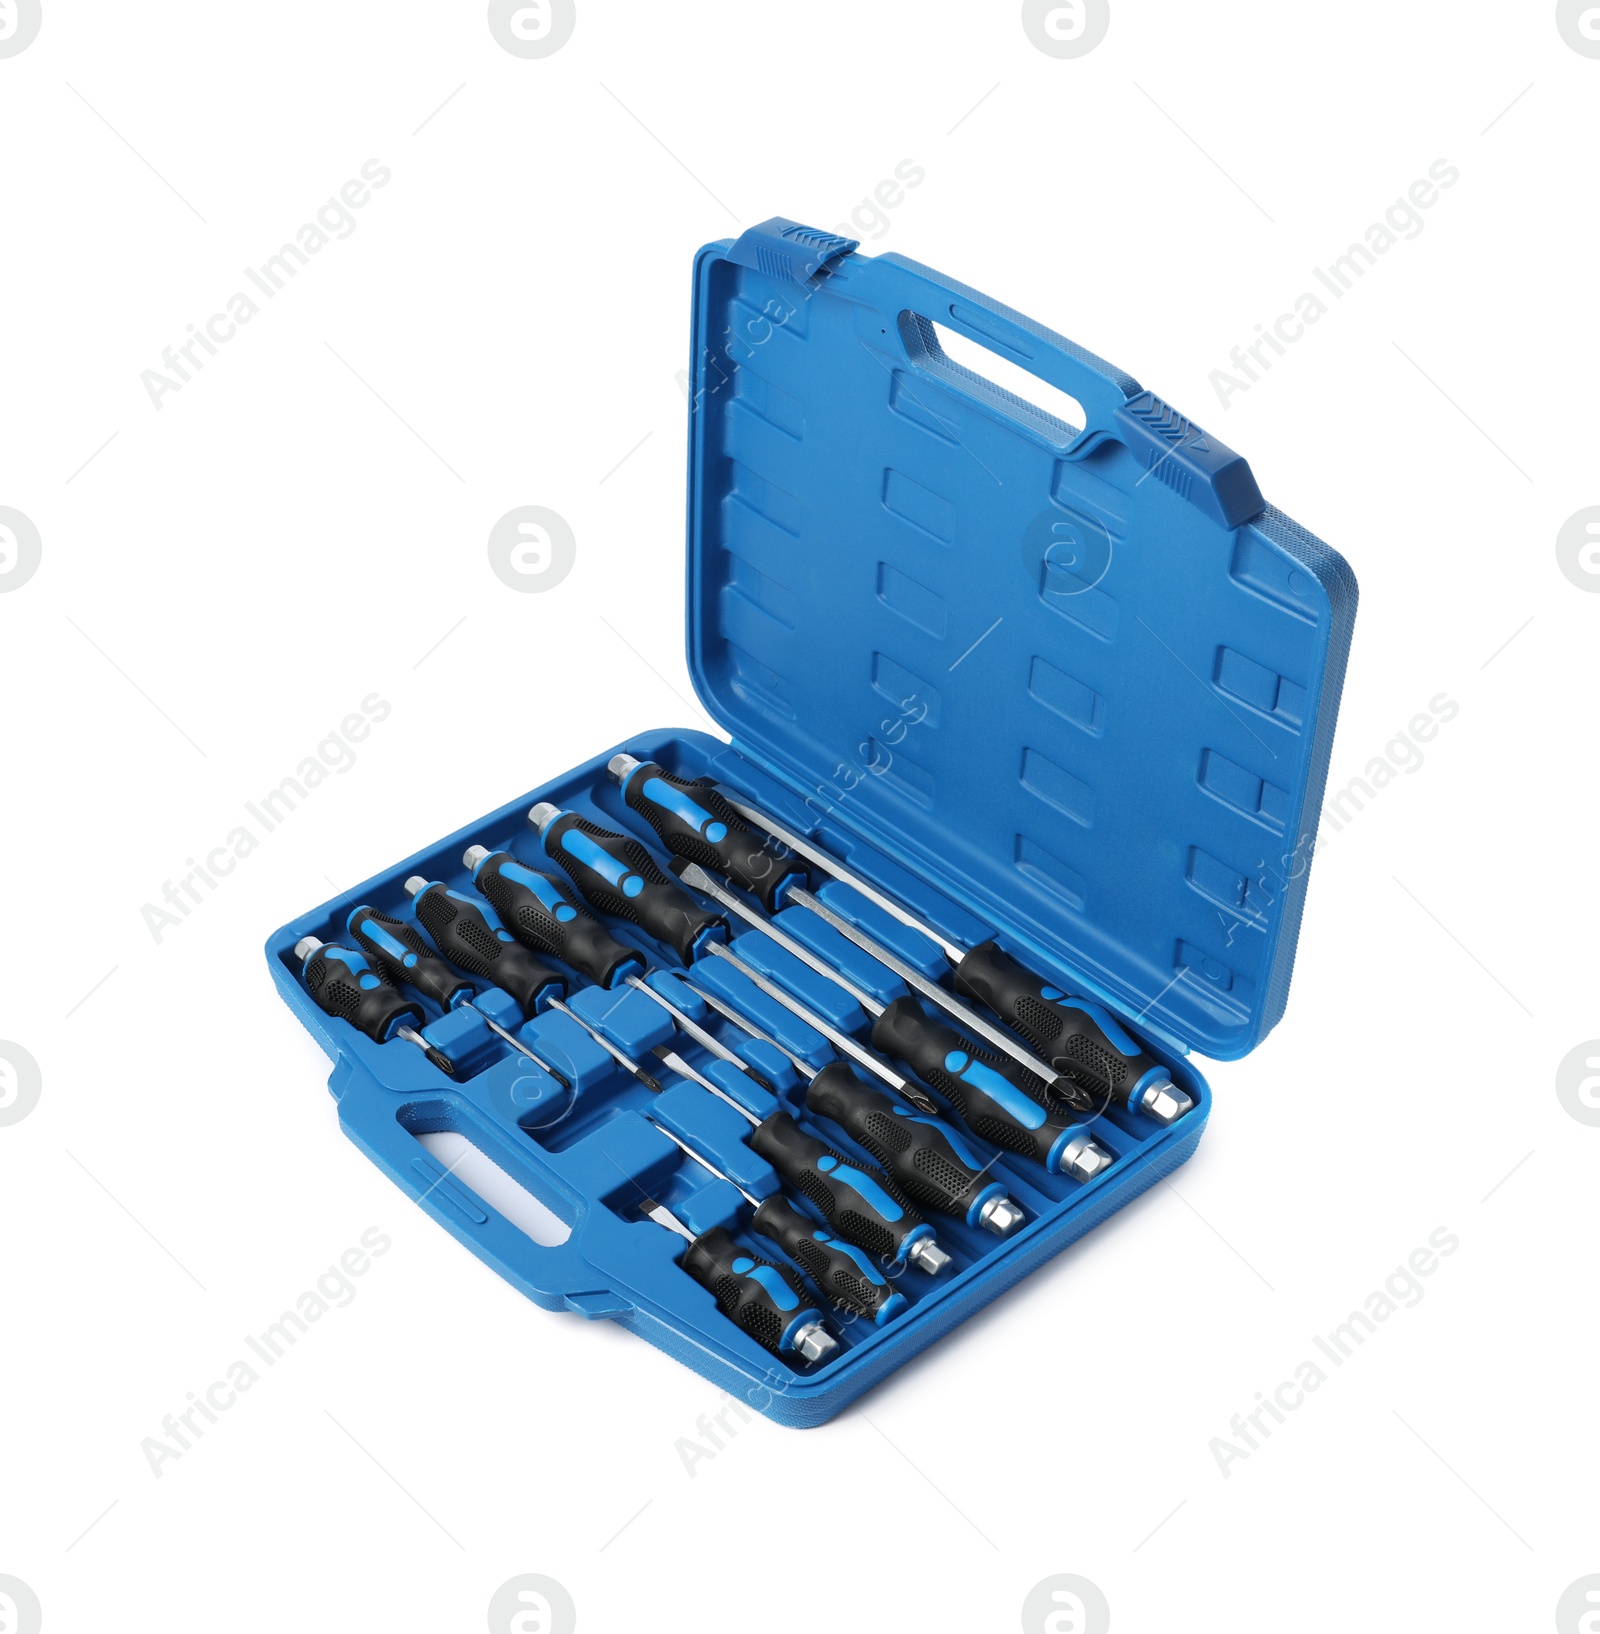 Photo of Set of screwdrivers in open toolbox isolated on white